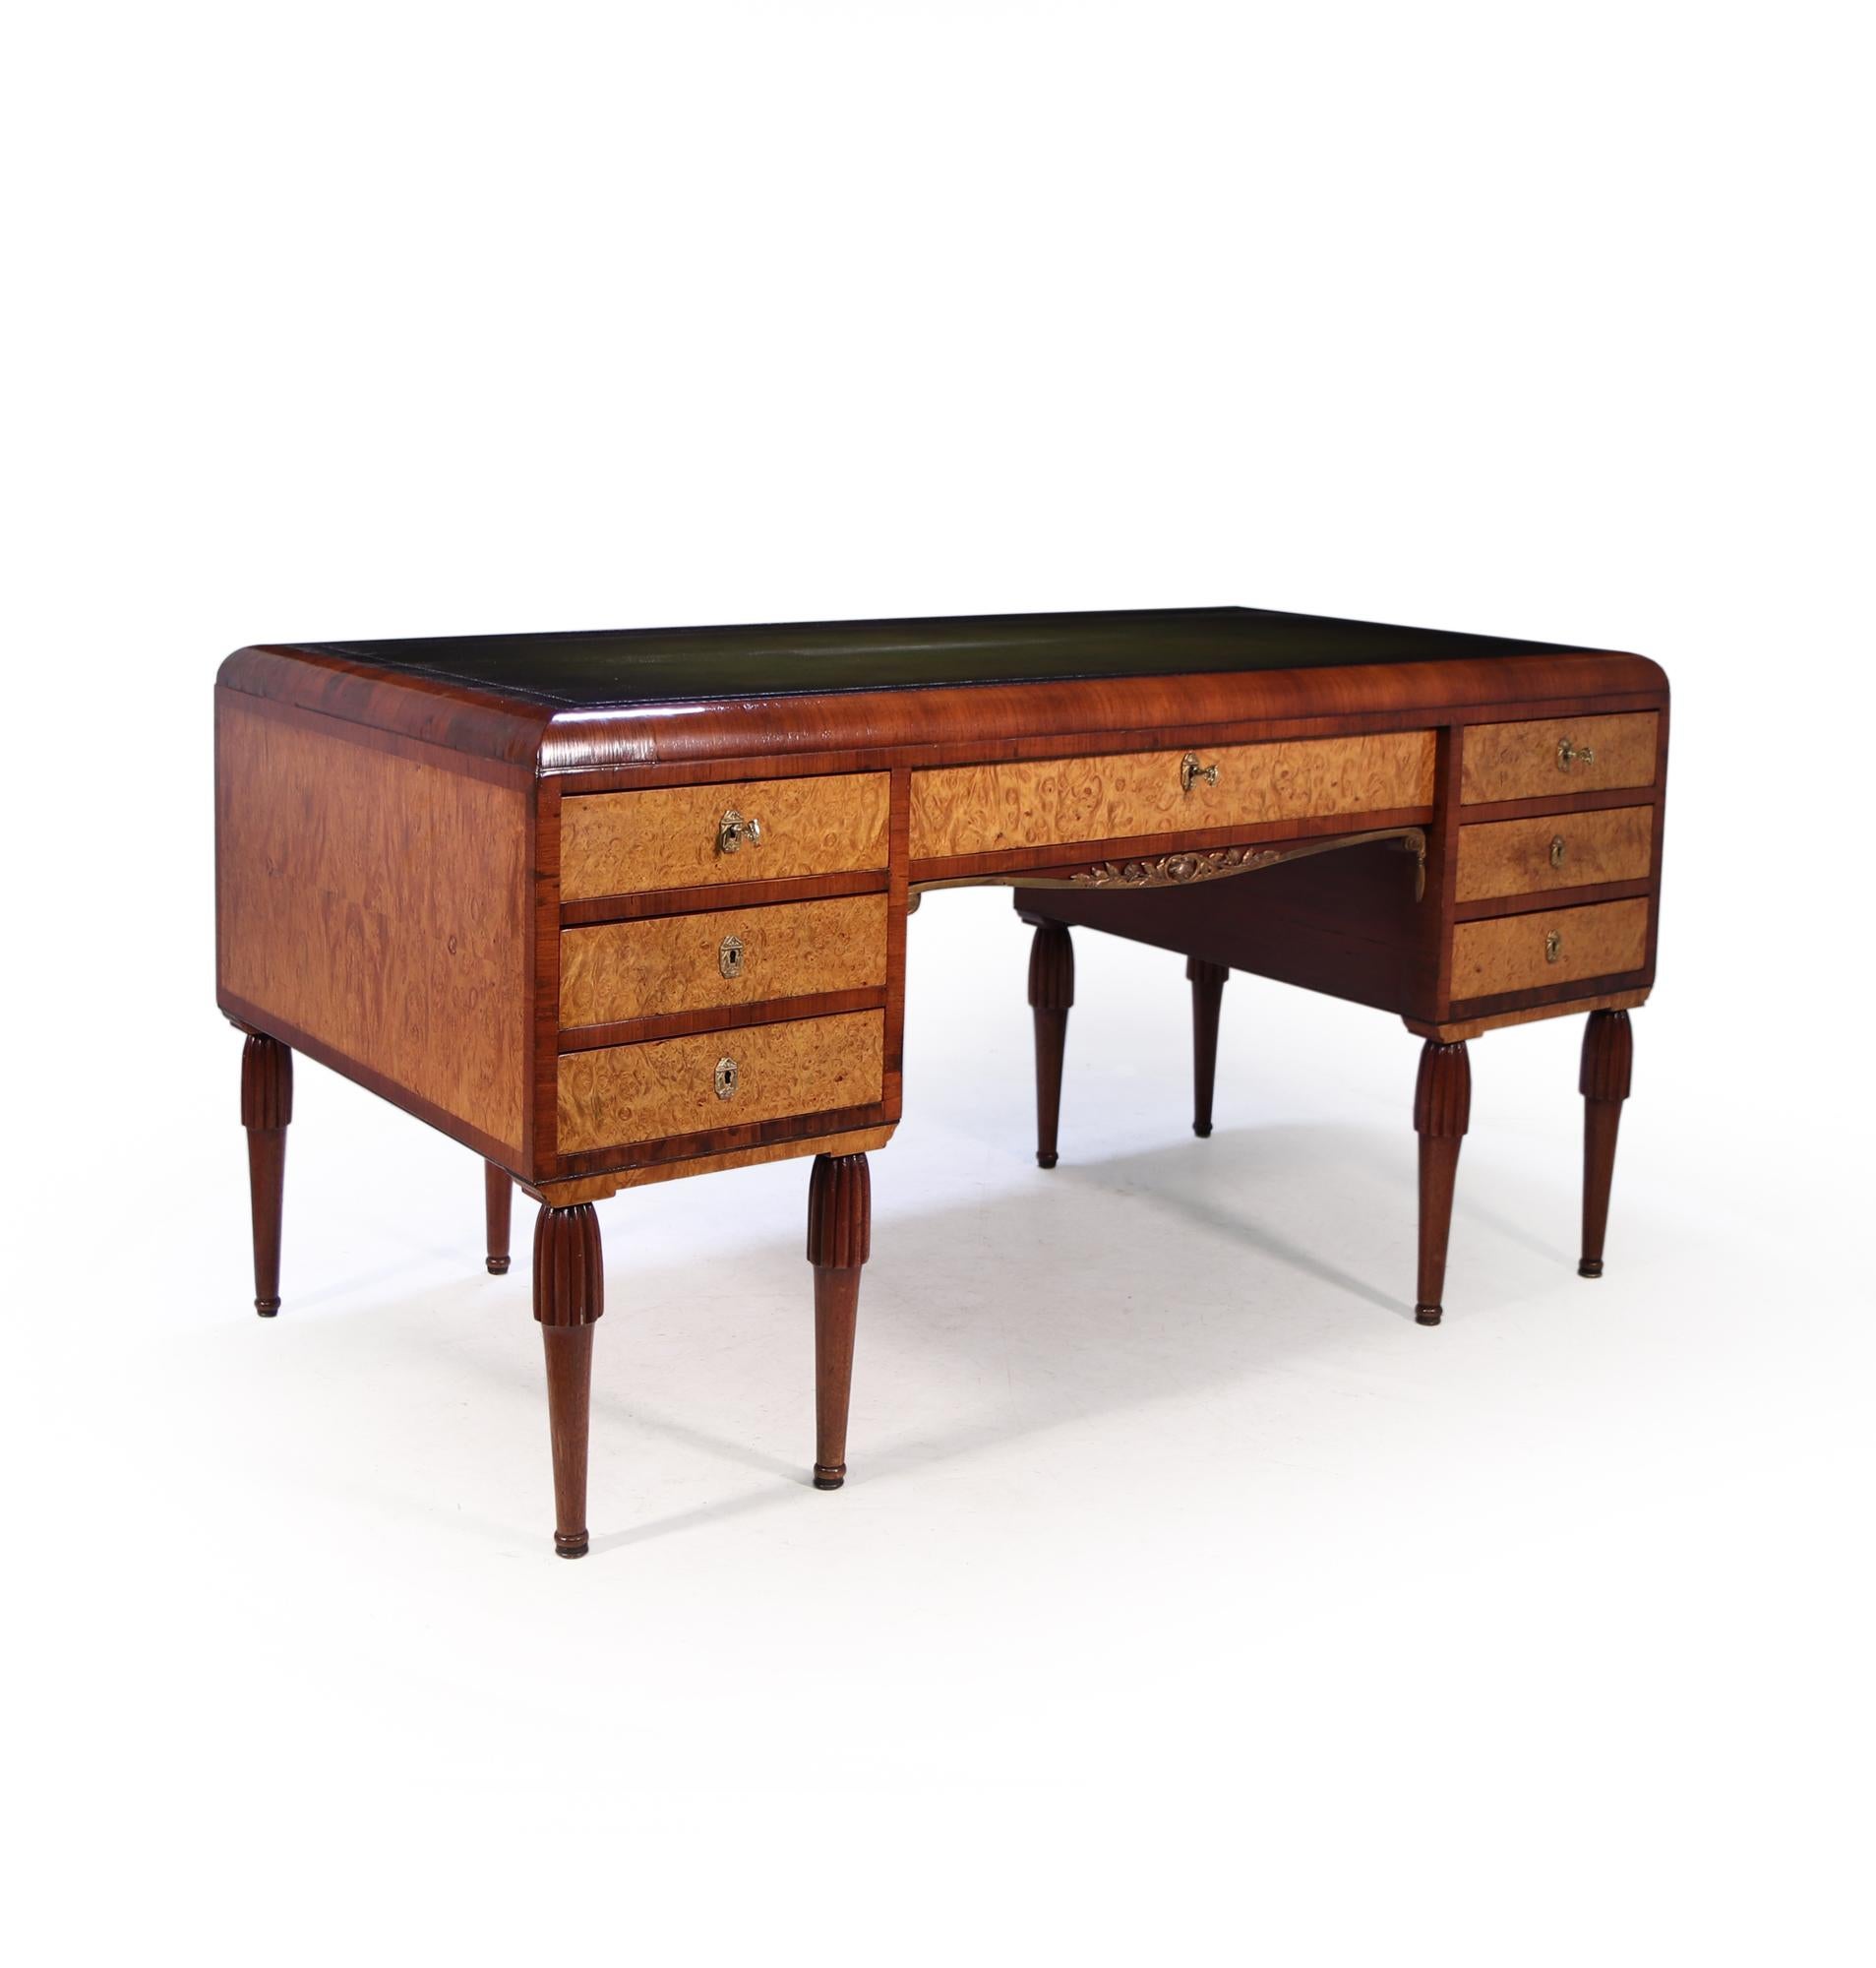 Produced in France around 1925 this Art Deco desk with gilt bronze mounts and escutcheons very much in the manner of and attributable to Maurice Dufrene. Hand-made in Paris around 1925 from prime selected Mahogany, Oak and burr maple , the desk has